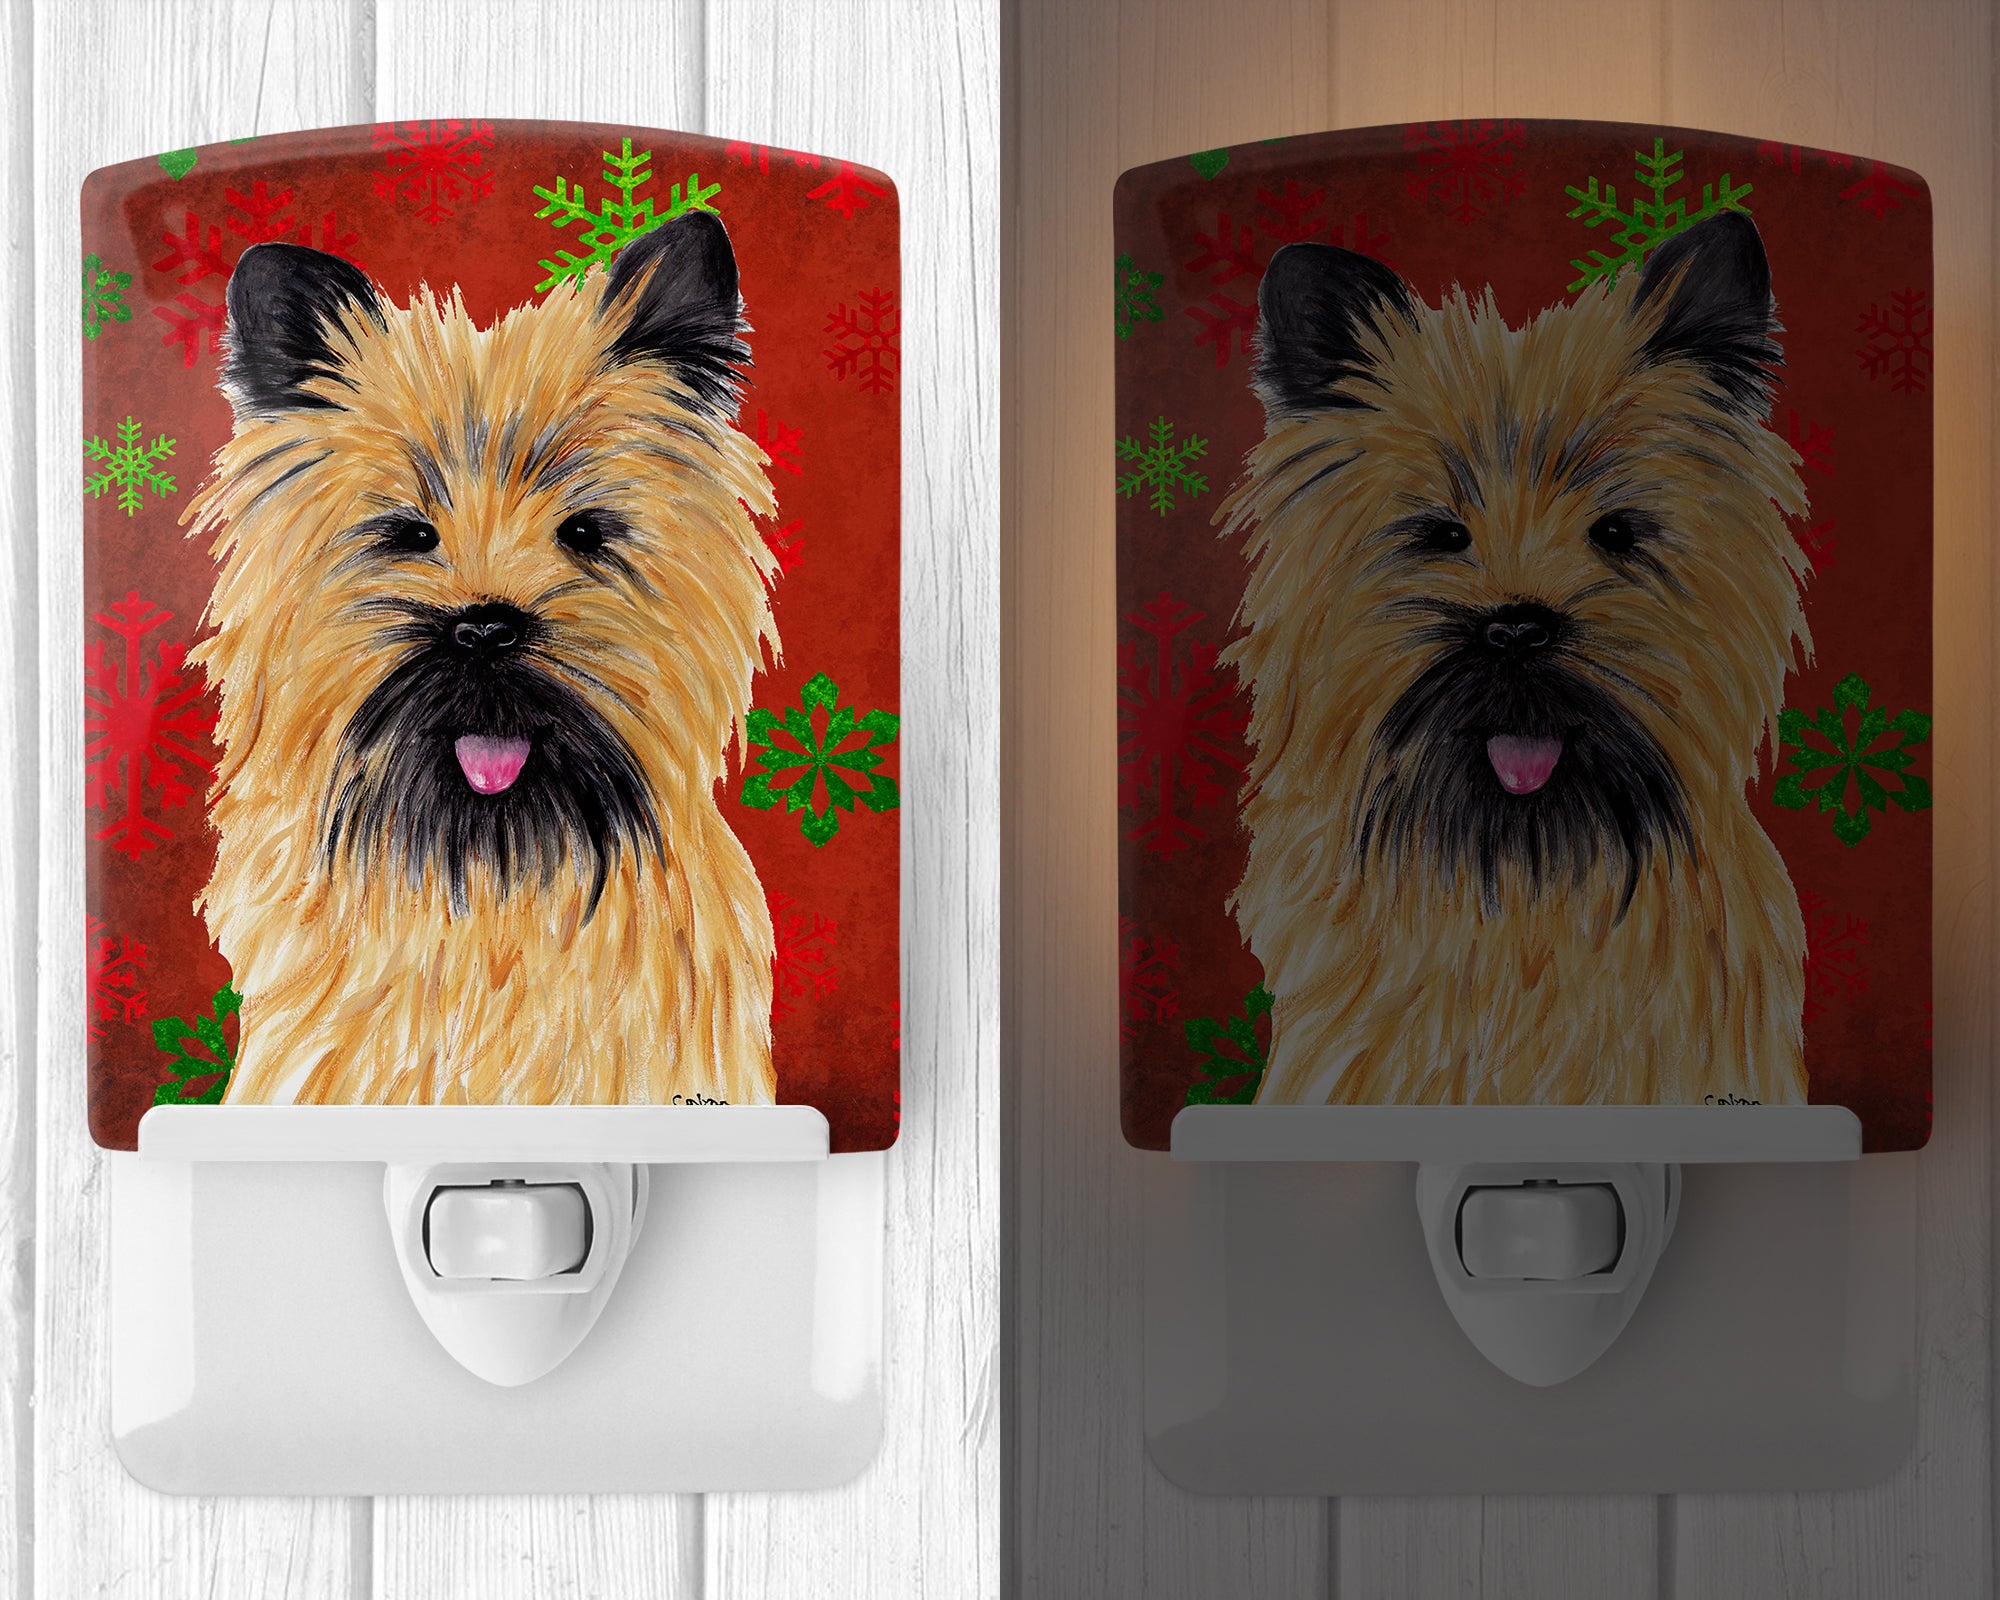 Cairn Terrier Red and Green Snowflakes Holiday Christmas Ceramic Night Light SC9415CNL - the-store.com